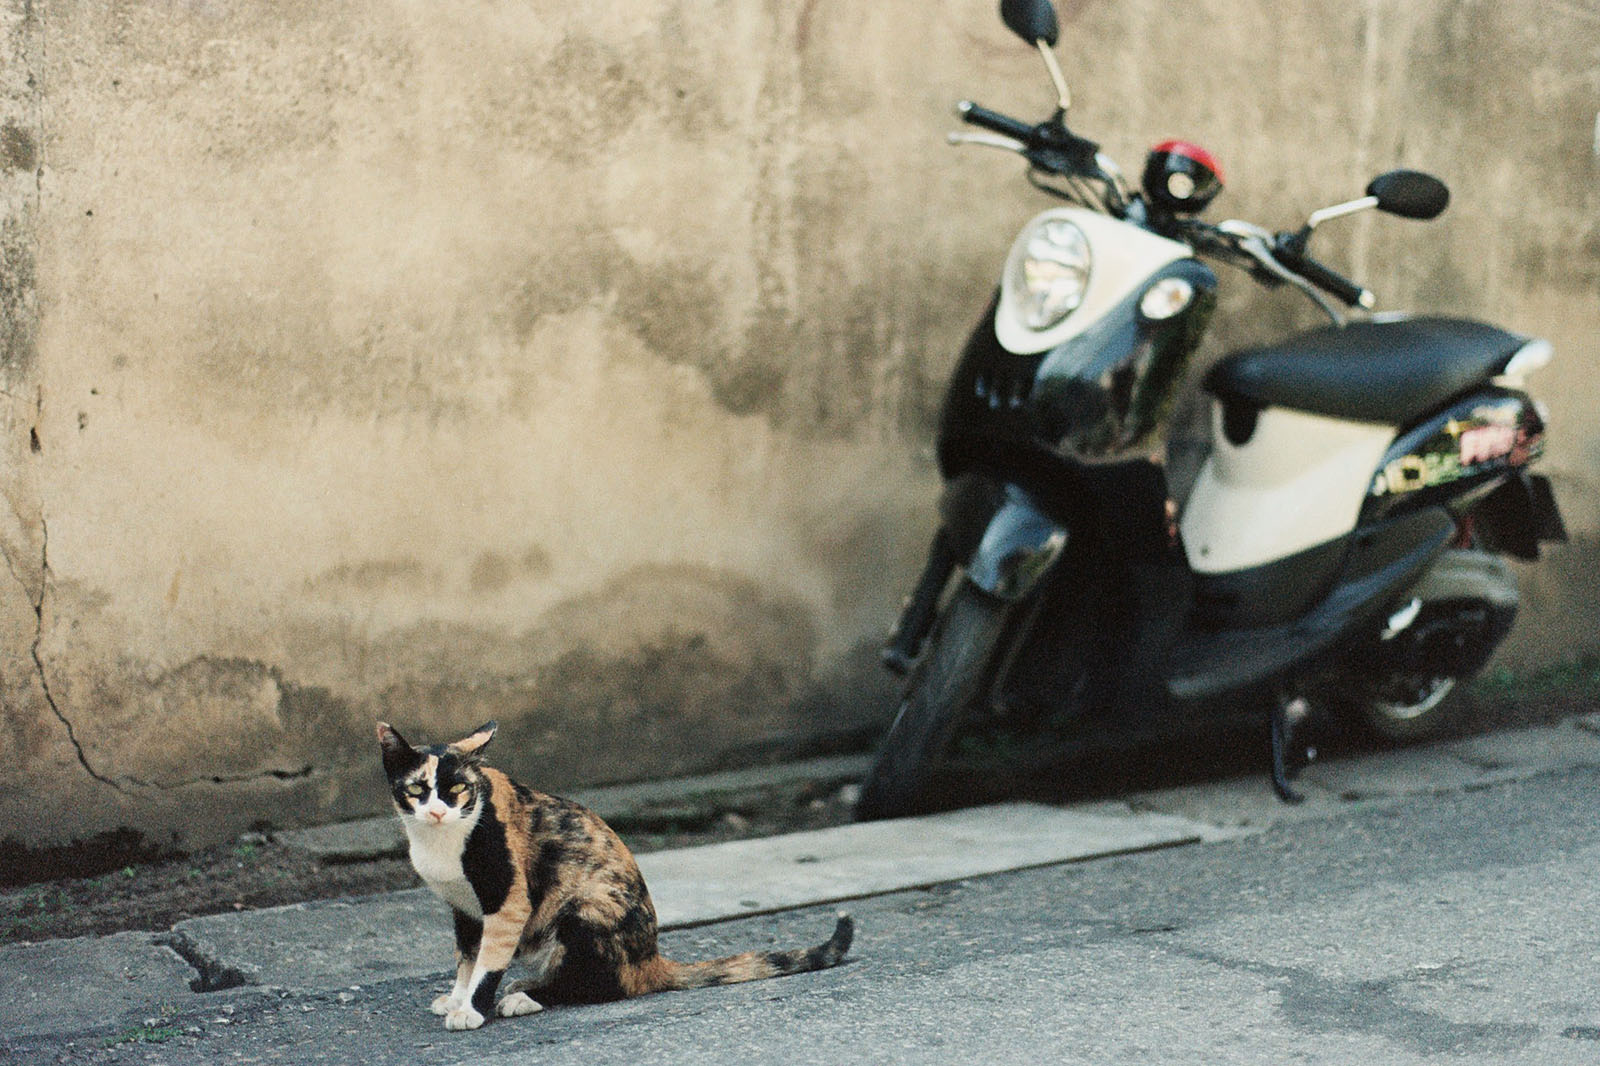 Street cat and a motorbike in Chiang Mai | Thailand Travel Photos